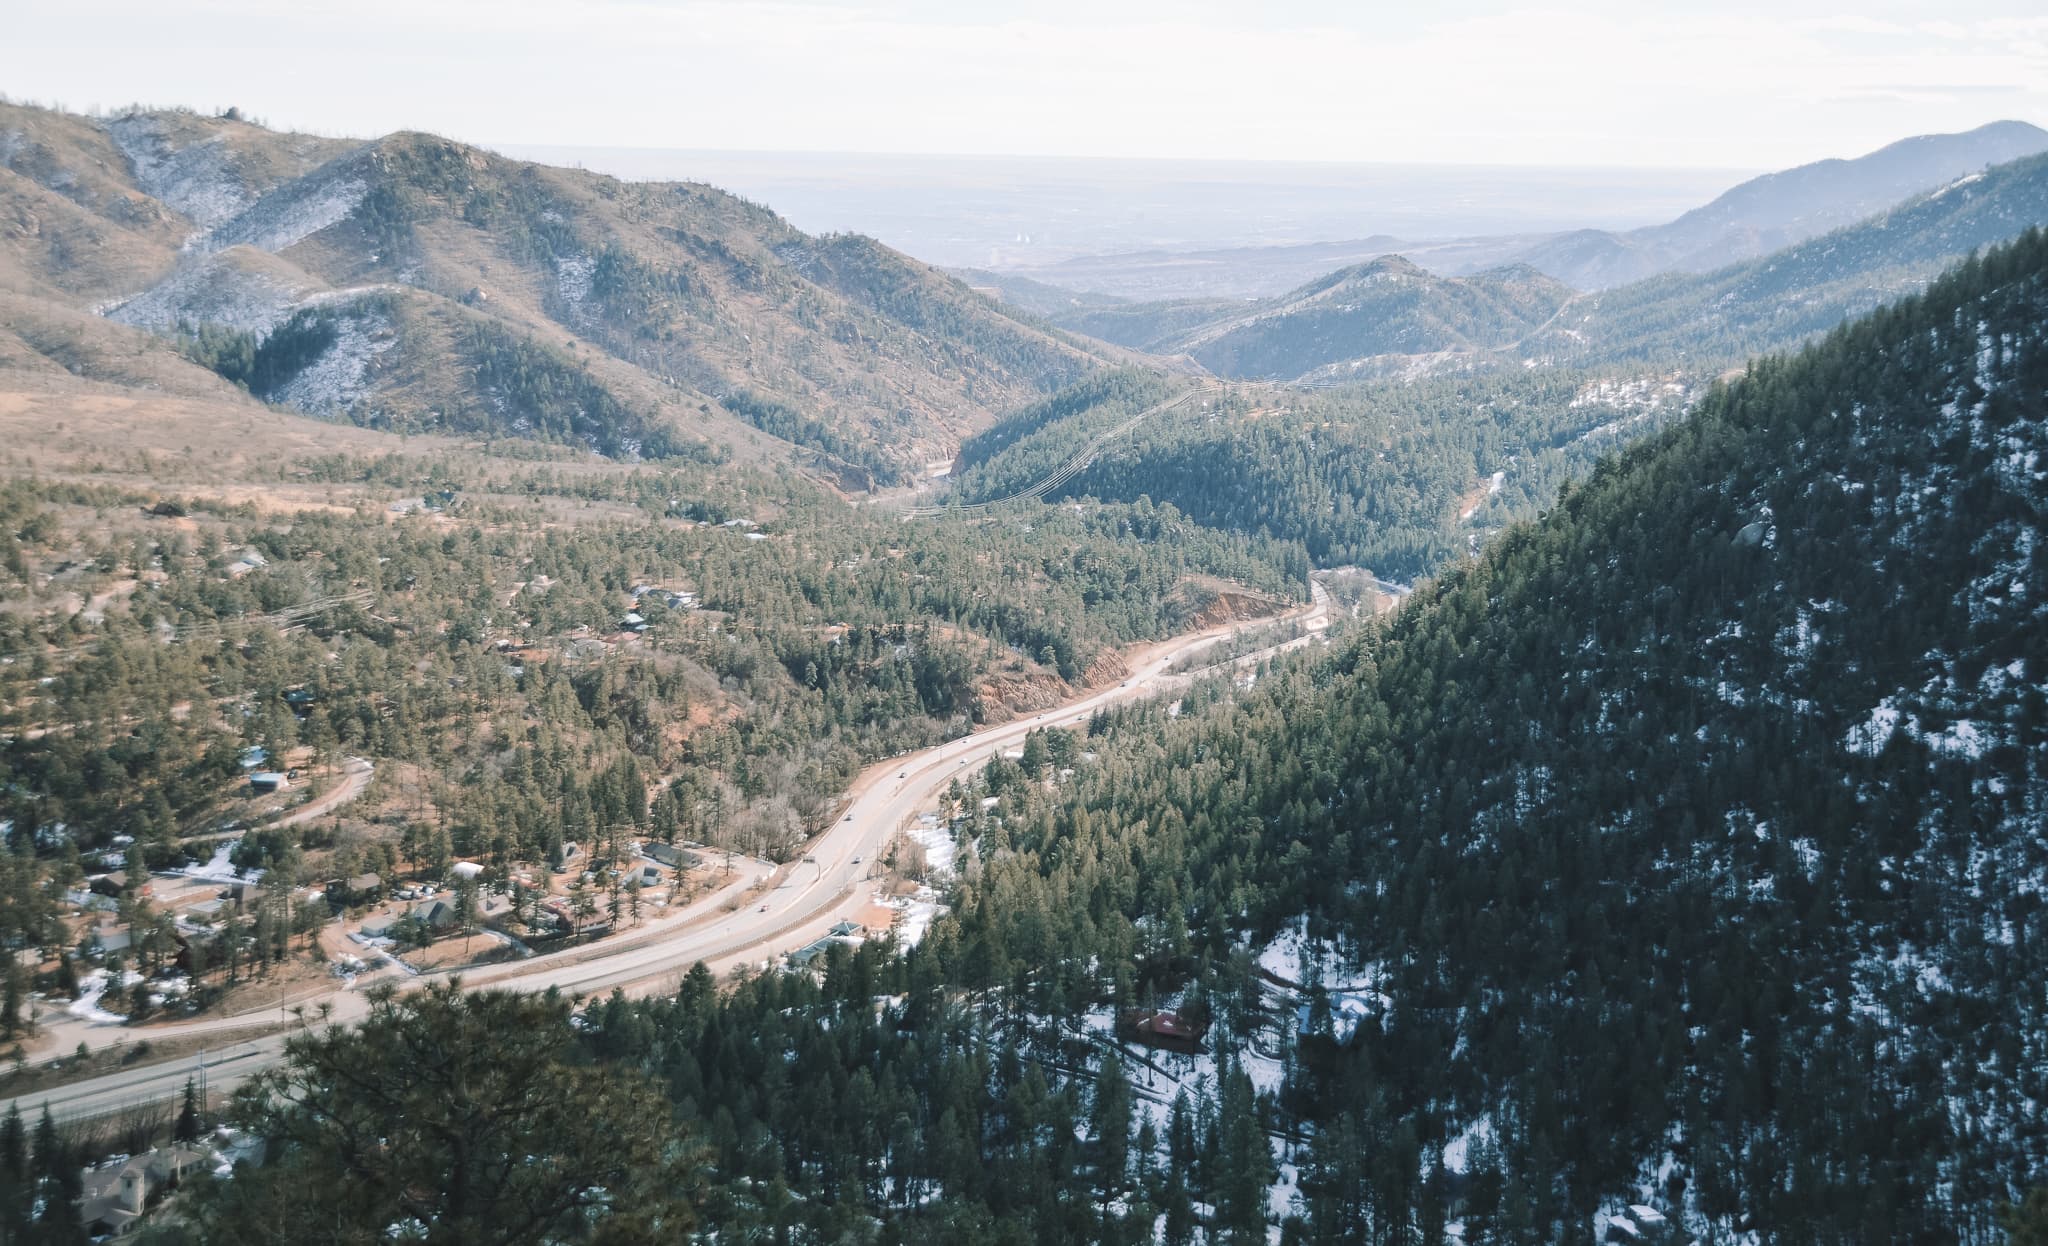 Everything you must know before visiting Colorado Springs in Colorado, USA. Hikes, hidden gems, and the best stops for your road trip. | Her Life Adventures | #coloradosprings #nationalpark #usadestinations #colorado #hikes #thingstodo #roadtrip #lodging #itinerary #guide